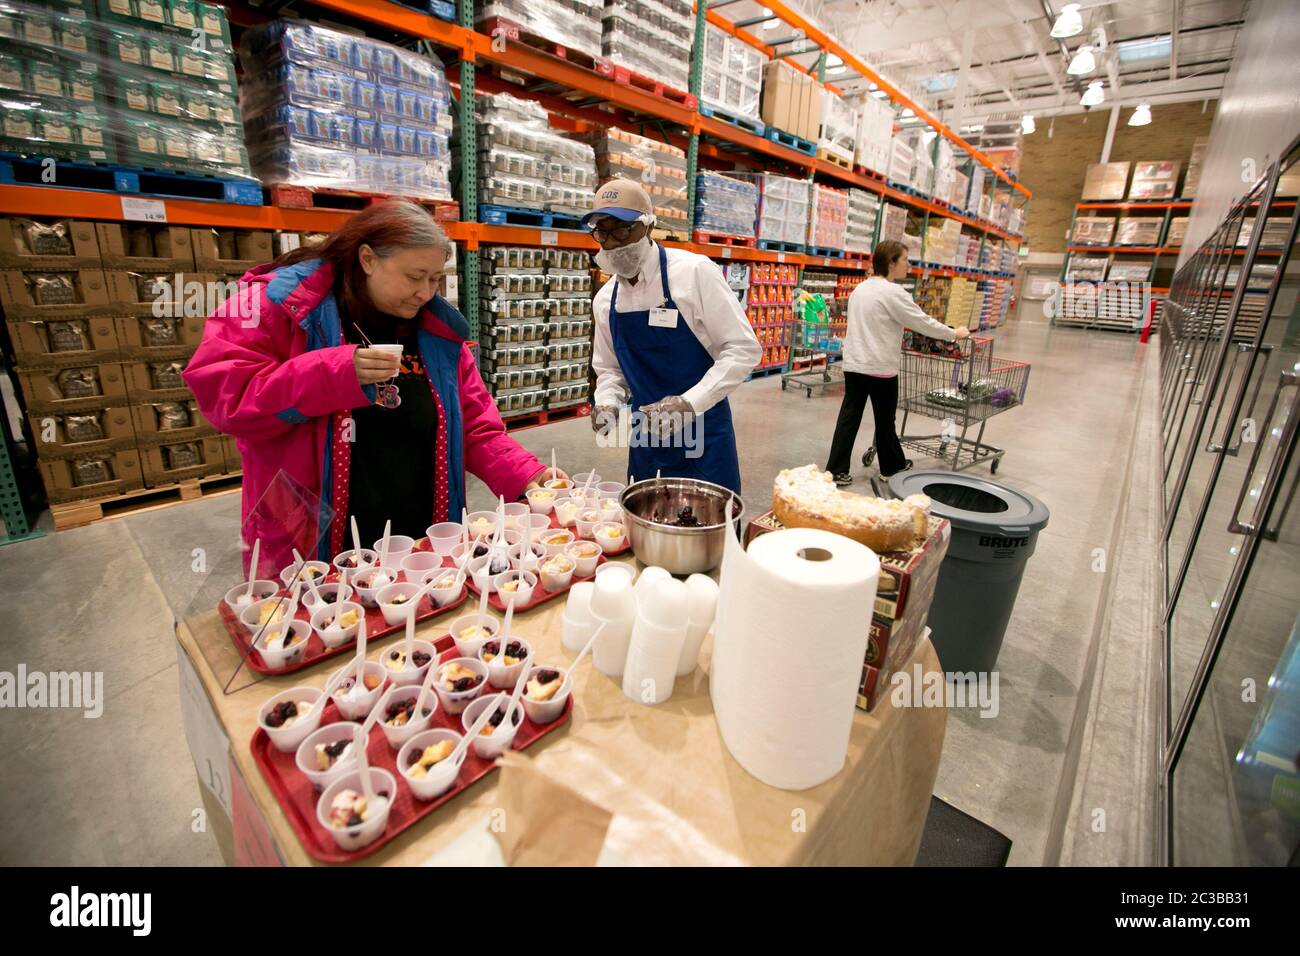 Cedar Park Texas USA, November 22 2013: Female shopper helps herself to a free sample of cake at a newly opened Costco warehouse club in a fast-growing Austin suburb.   ©Marjorie Kamys Cotera/Daemmrich Photography Stock Photo